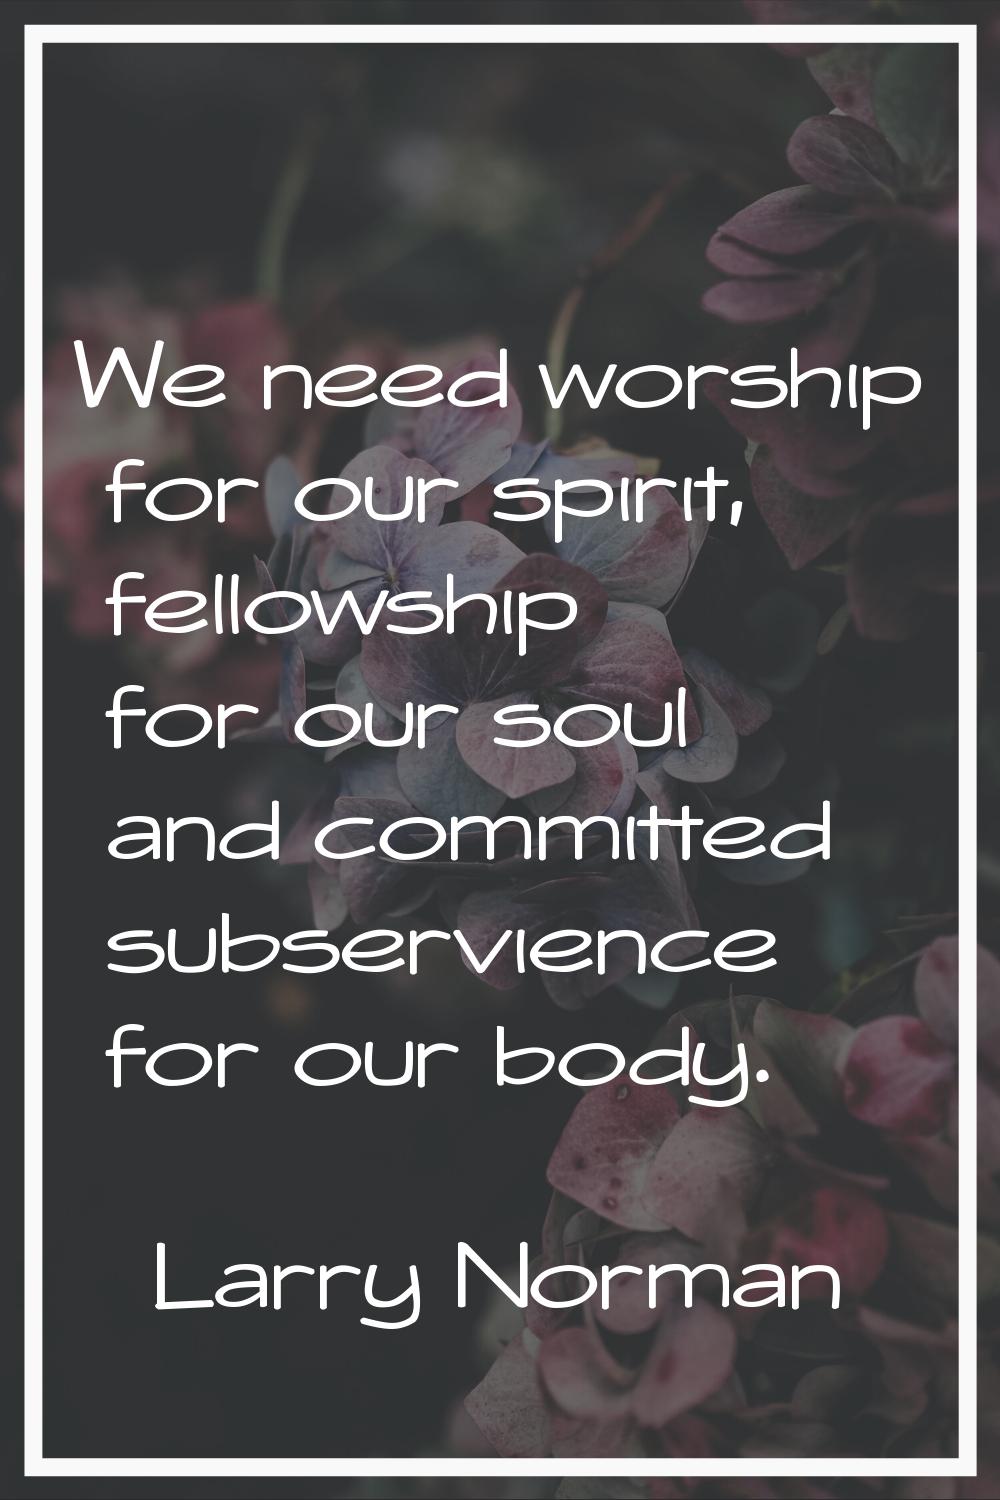 We need worship for our spirit, fellowship for our soul and committed subservience for our body.